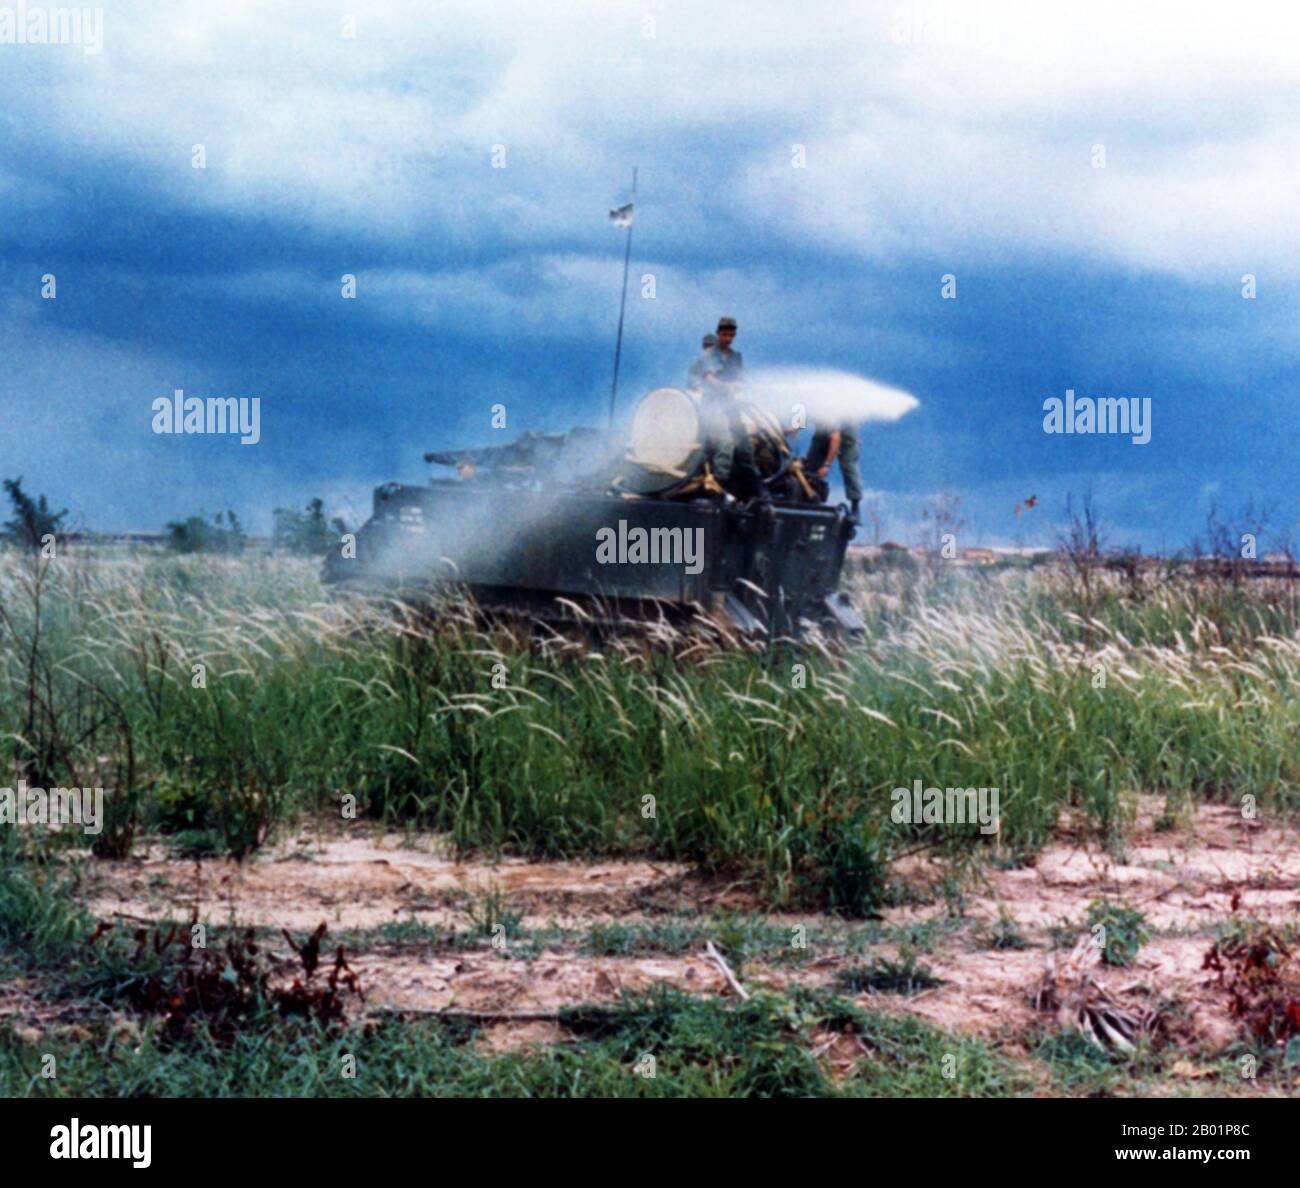 Vietnam: A US Army APC spraying agent orange during Operation Ranch Hand, c. 1965.  Operation Ranch Hand was a U.S. military operation during the Vietnam War; lasting from 1962 until 1971. It was part of the overall herbicidal warfare program during the war called 'Operation Trail Dust'. Ranch Hand involved spraying an estimated 20 million US gallons of defoliants and herbicides over rural areas of South Vietnam in an attempt to deprive the NLF (Viet Cong) of vegetation cover and food. Areas of Laos and Cambodia were also sprayed to a lesser extent. Stock Photo